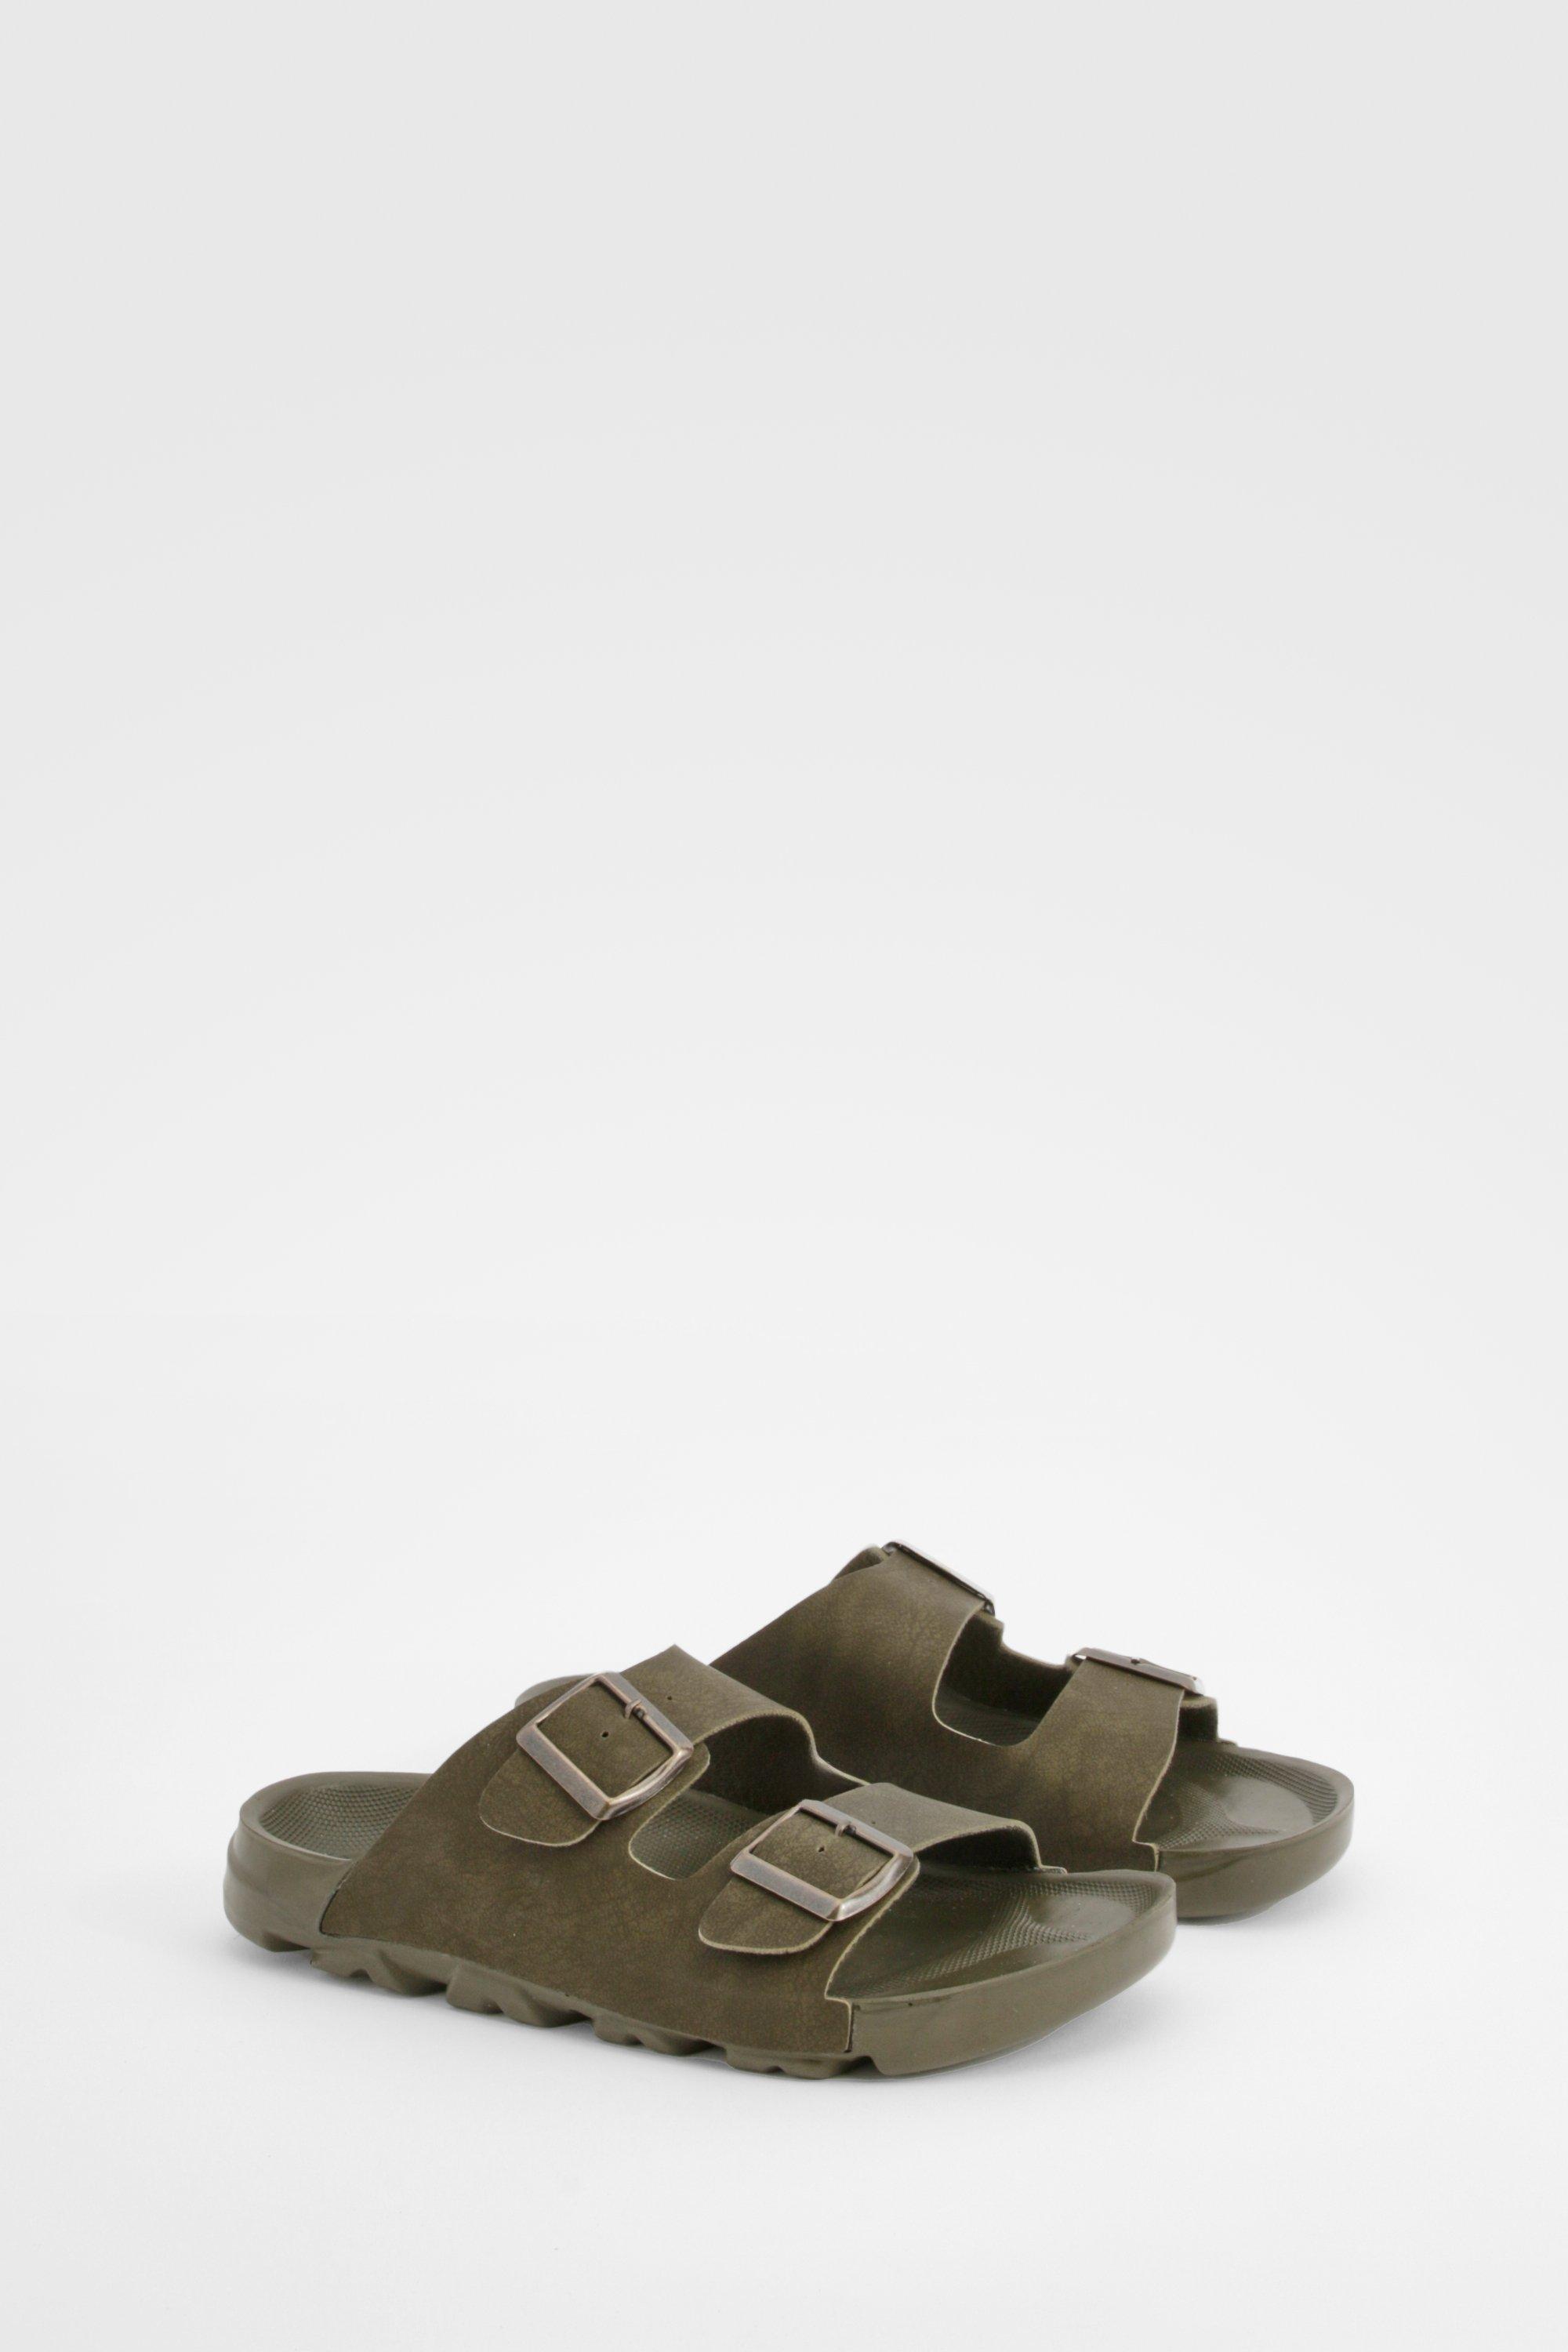 Image of Wide Fit Double Buckle Footbed Sliders, Verde